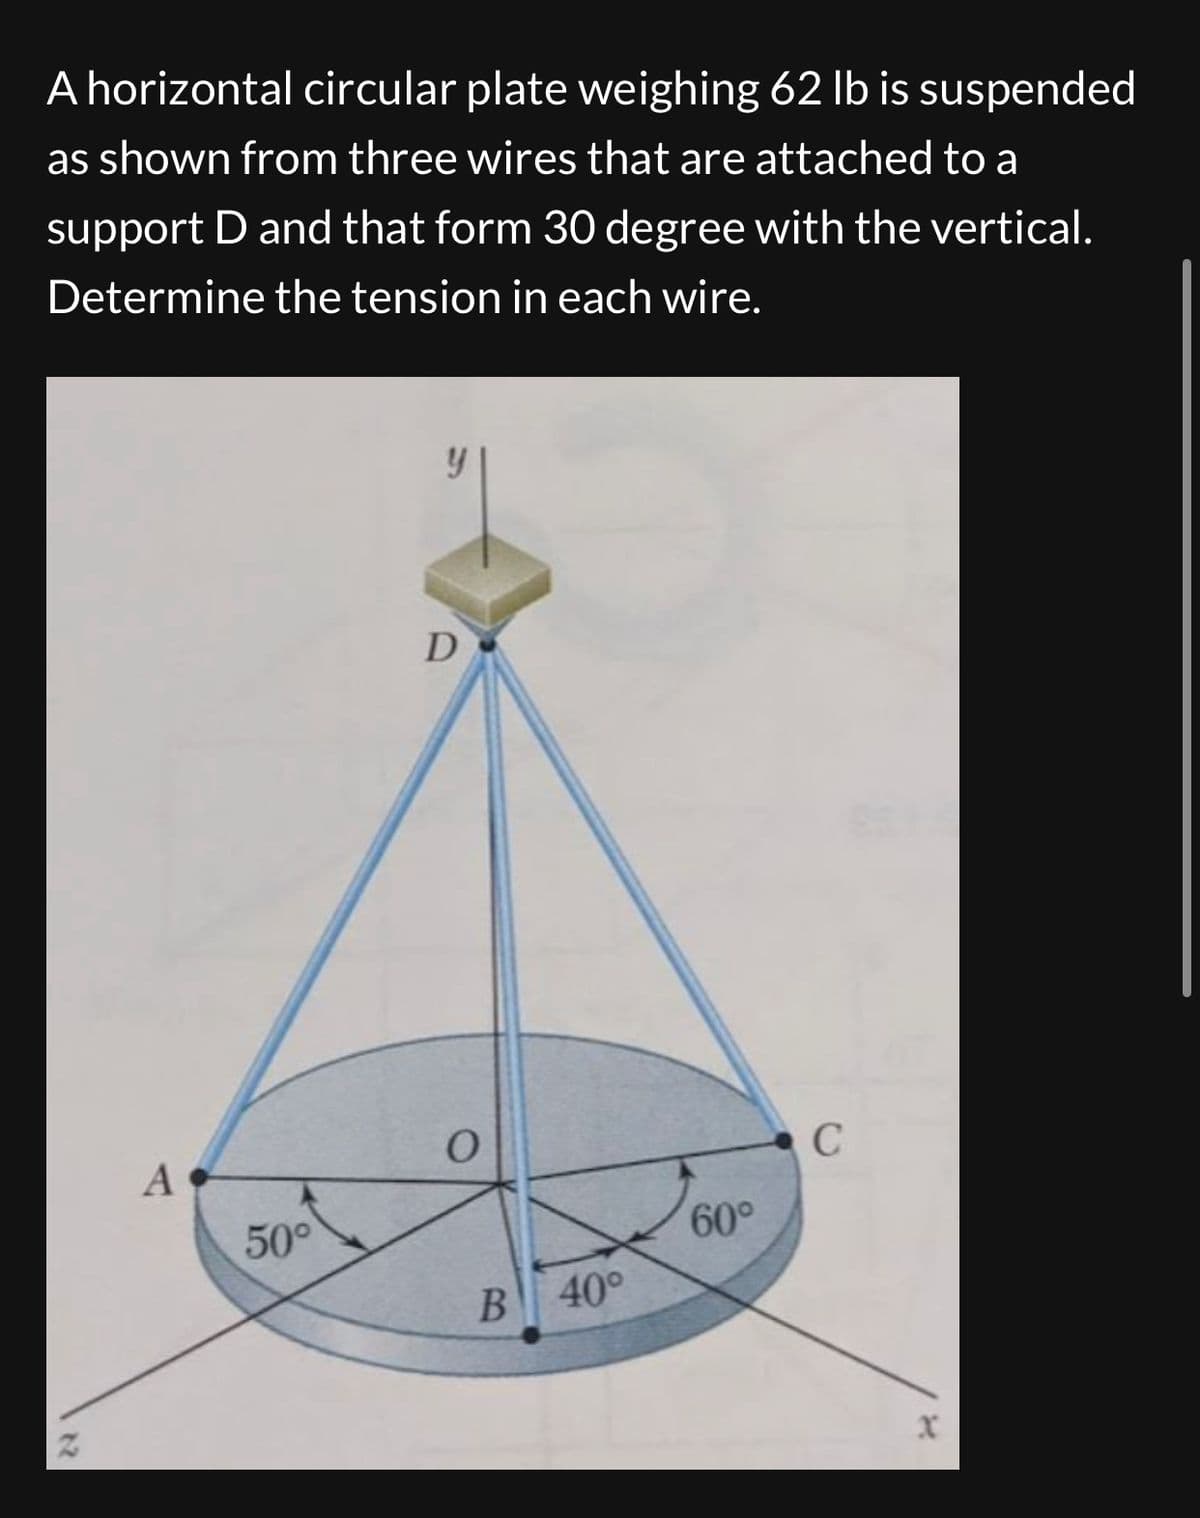 A horizontal circular plate weighing 62 lb is suspended
as shown from three wires that are attached to a
support D and that form 30 degree with the vertical.
Determine the tension in each wire.
12
A
50⁰
y
D
O
B 40°
60°
C
X